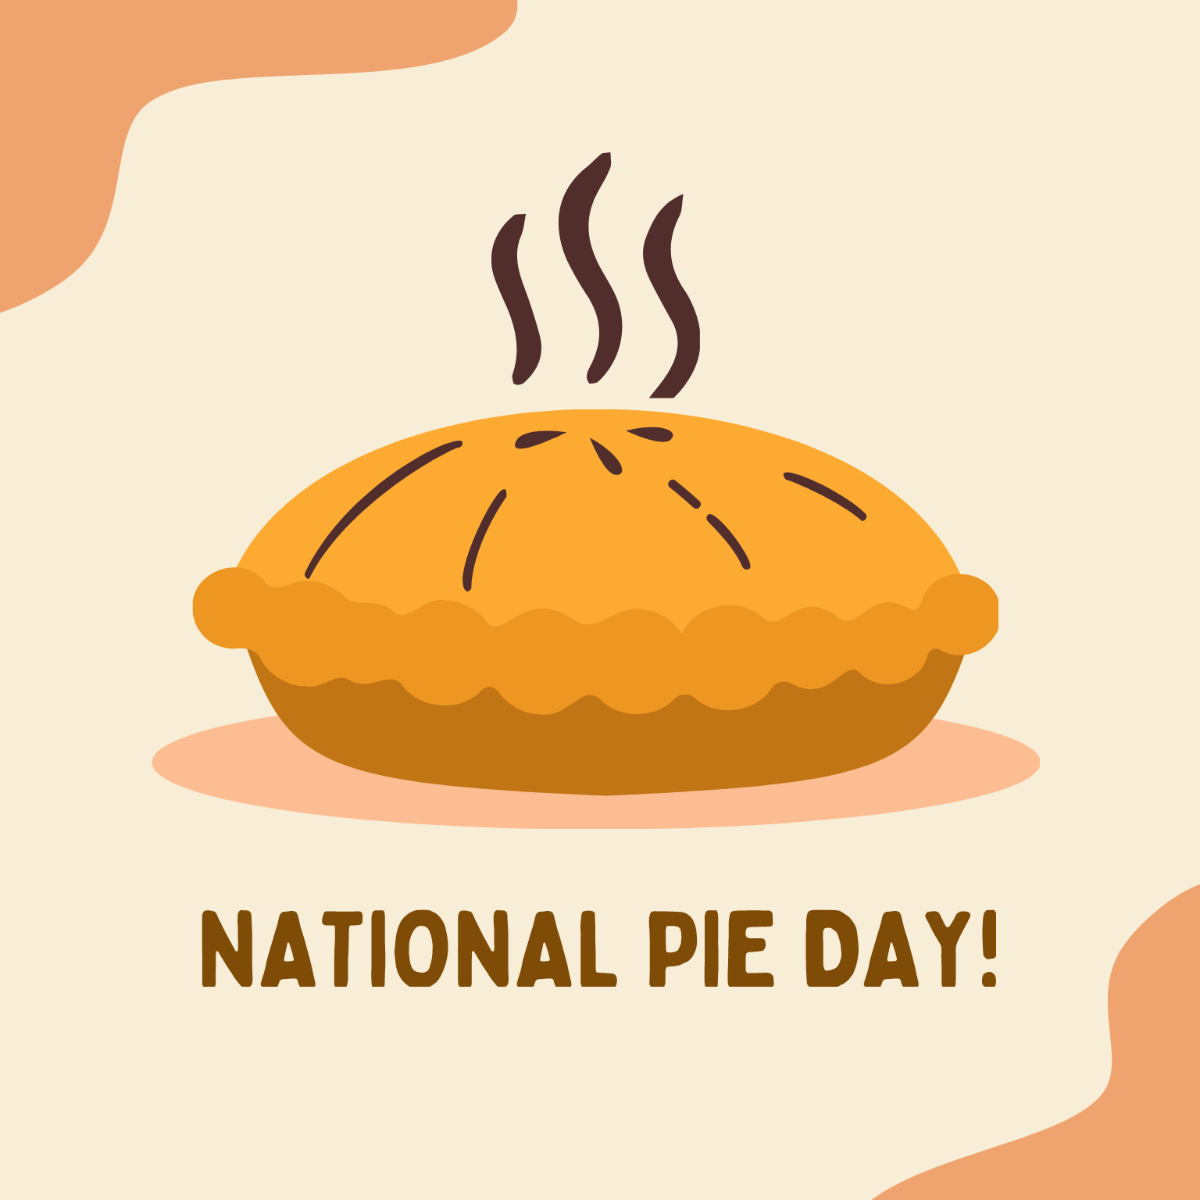 Free National Pie Day Illustration Template